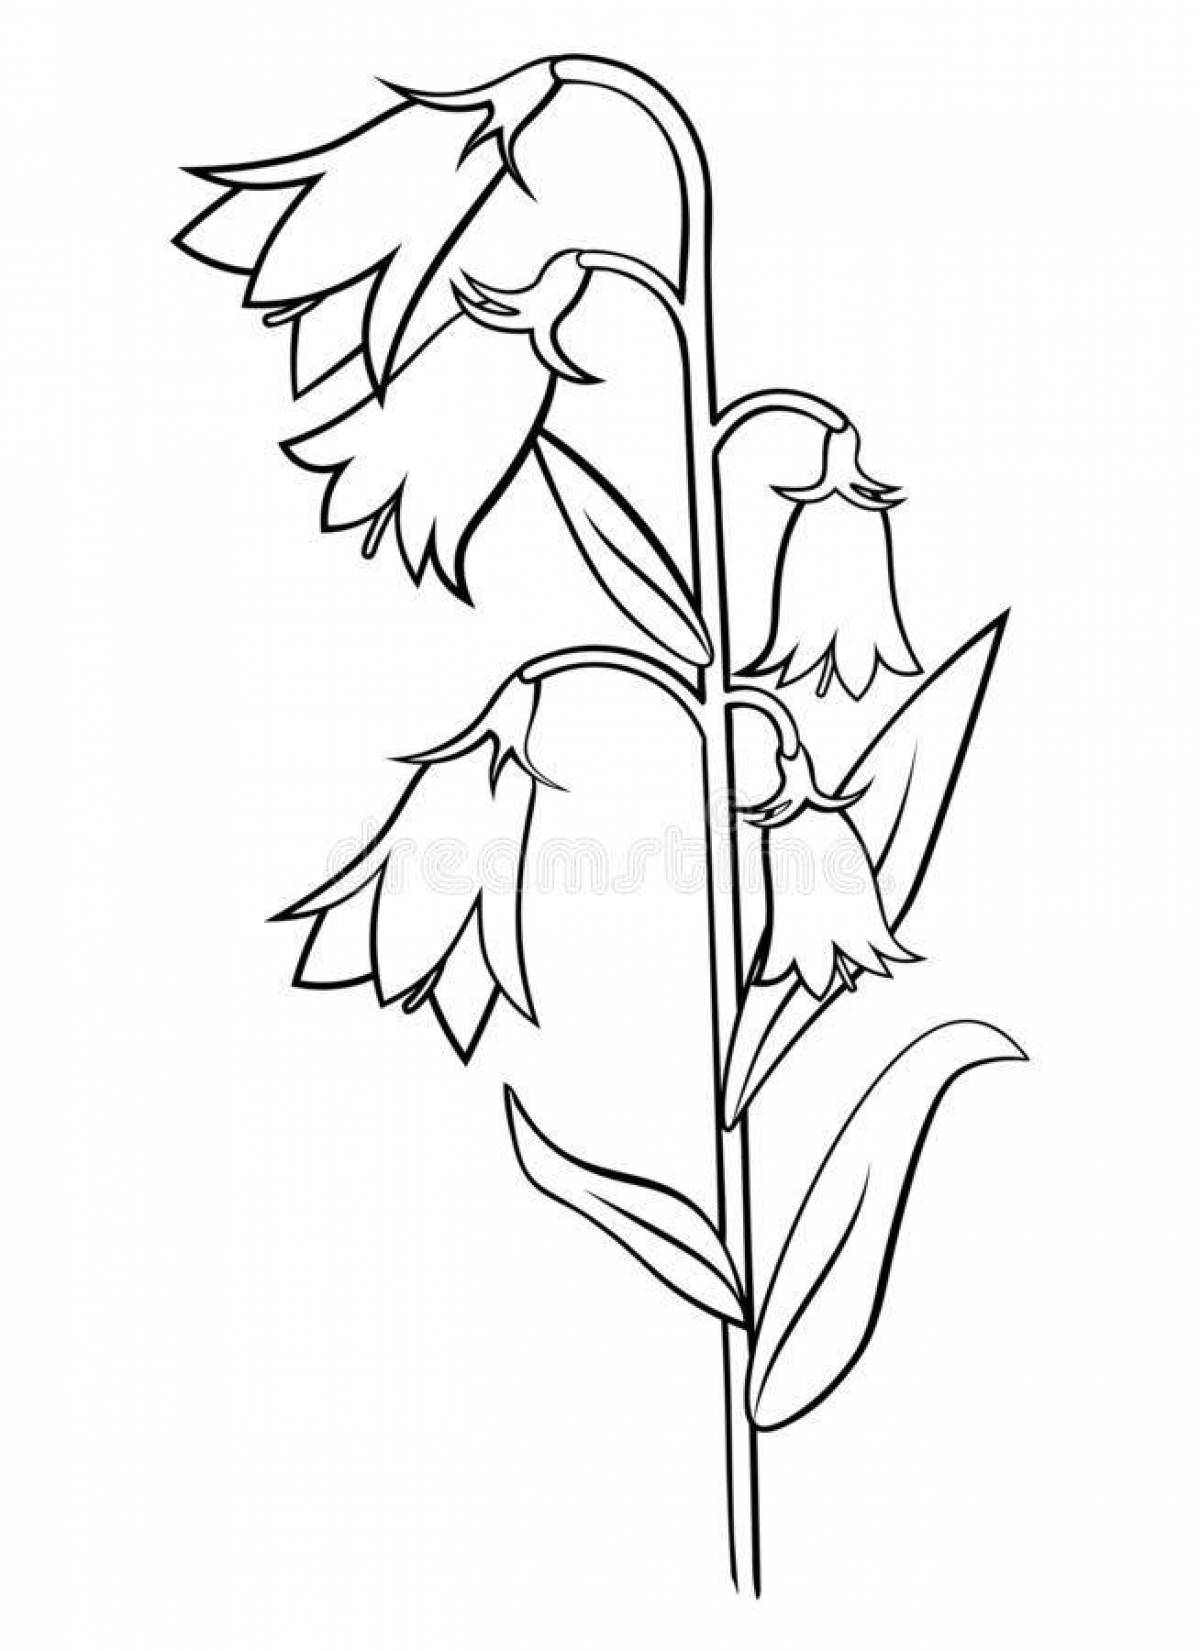 Coloring book shining flower bell